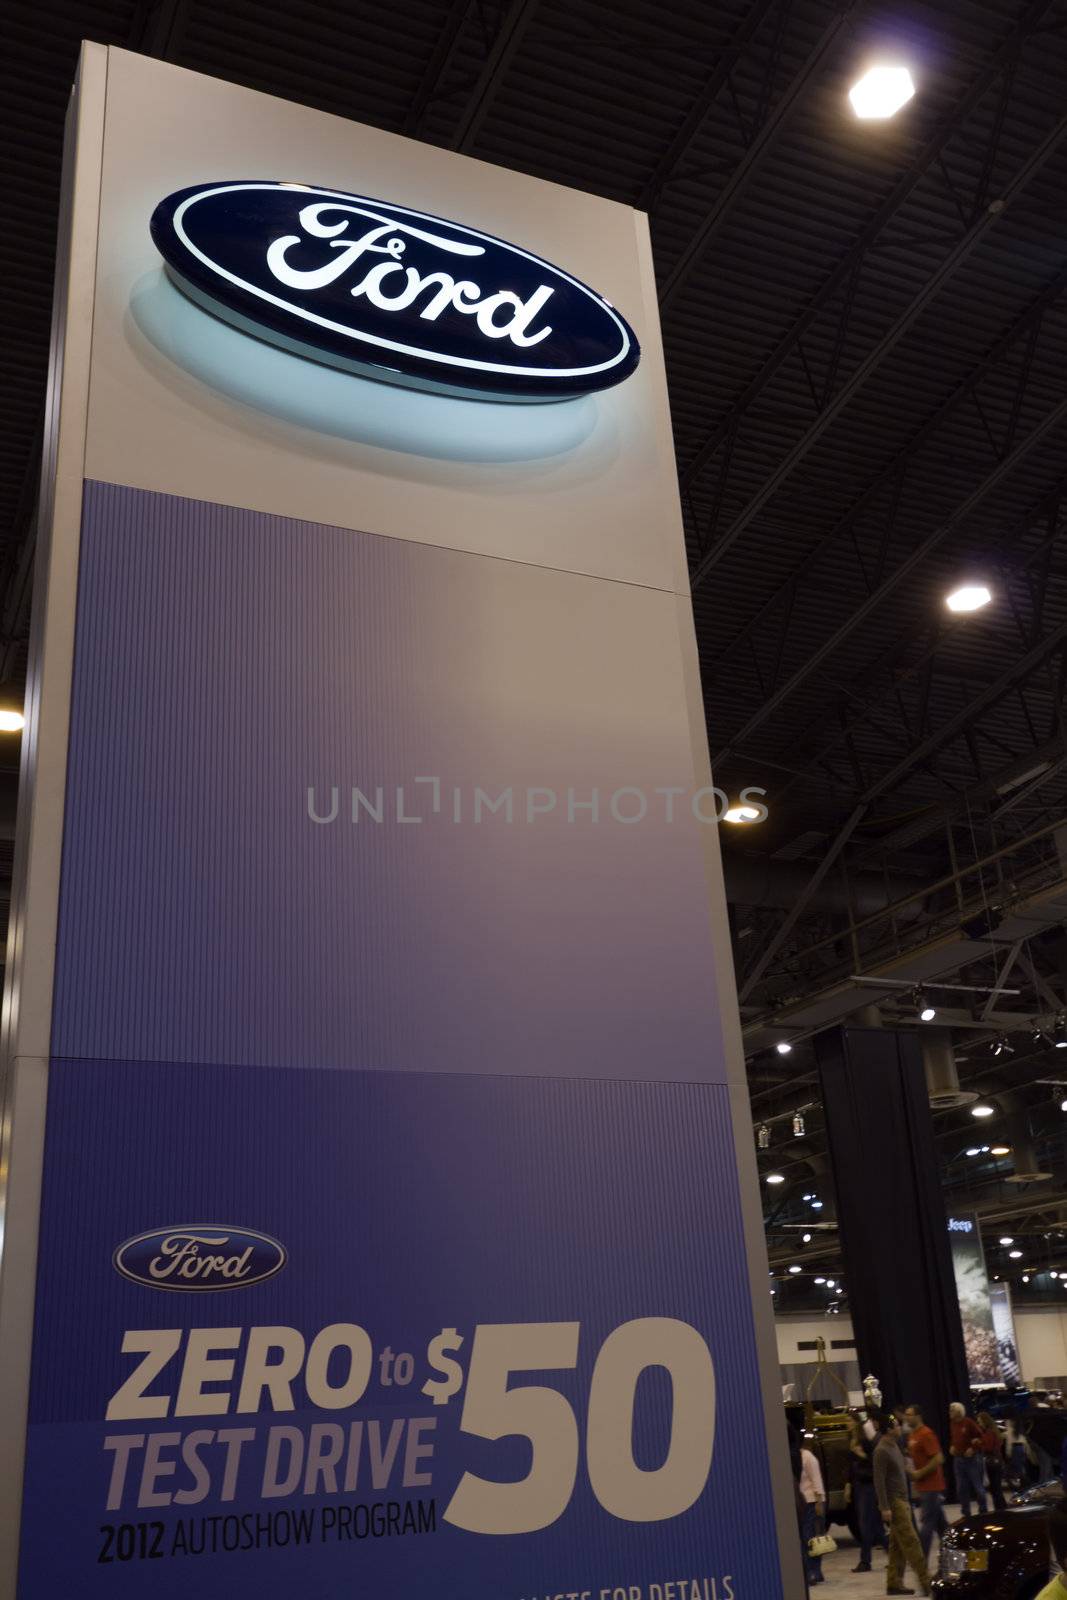 Ford Sign by Moonb007